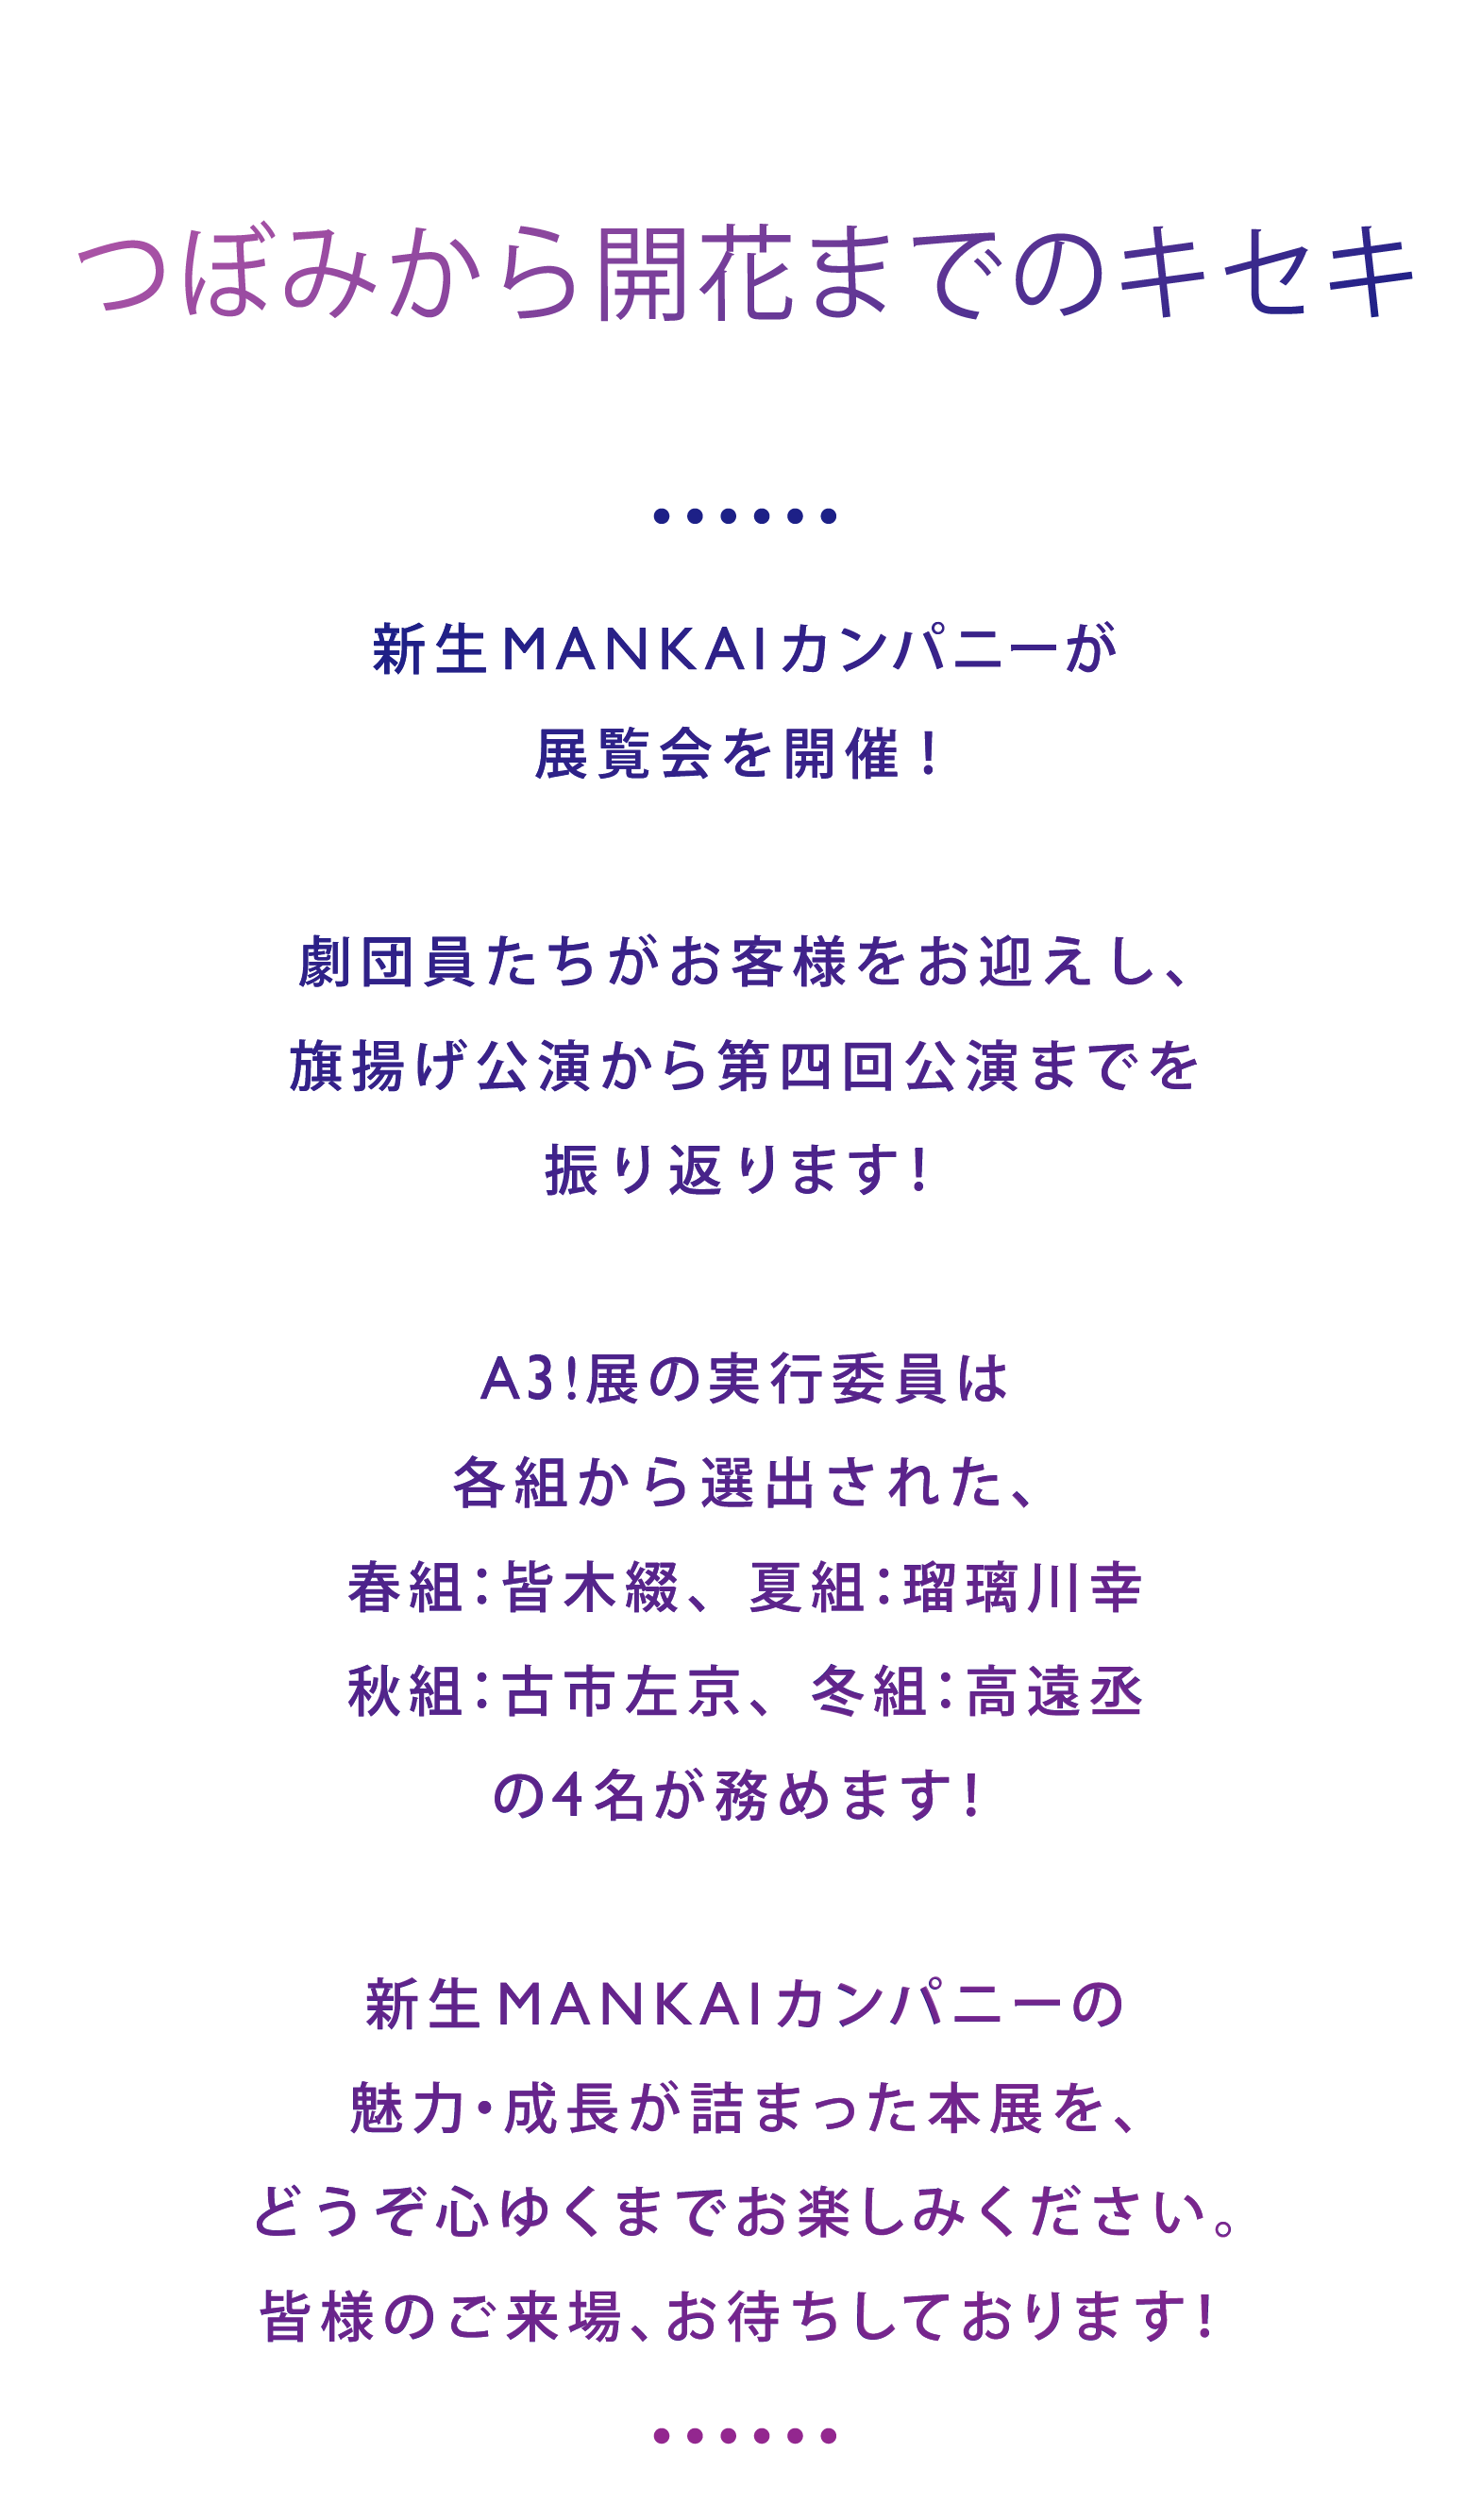 A3!展Welcome to MANKAI Exhibition